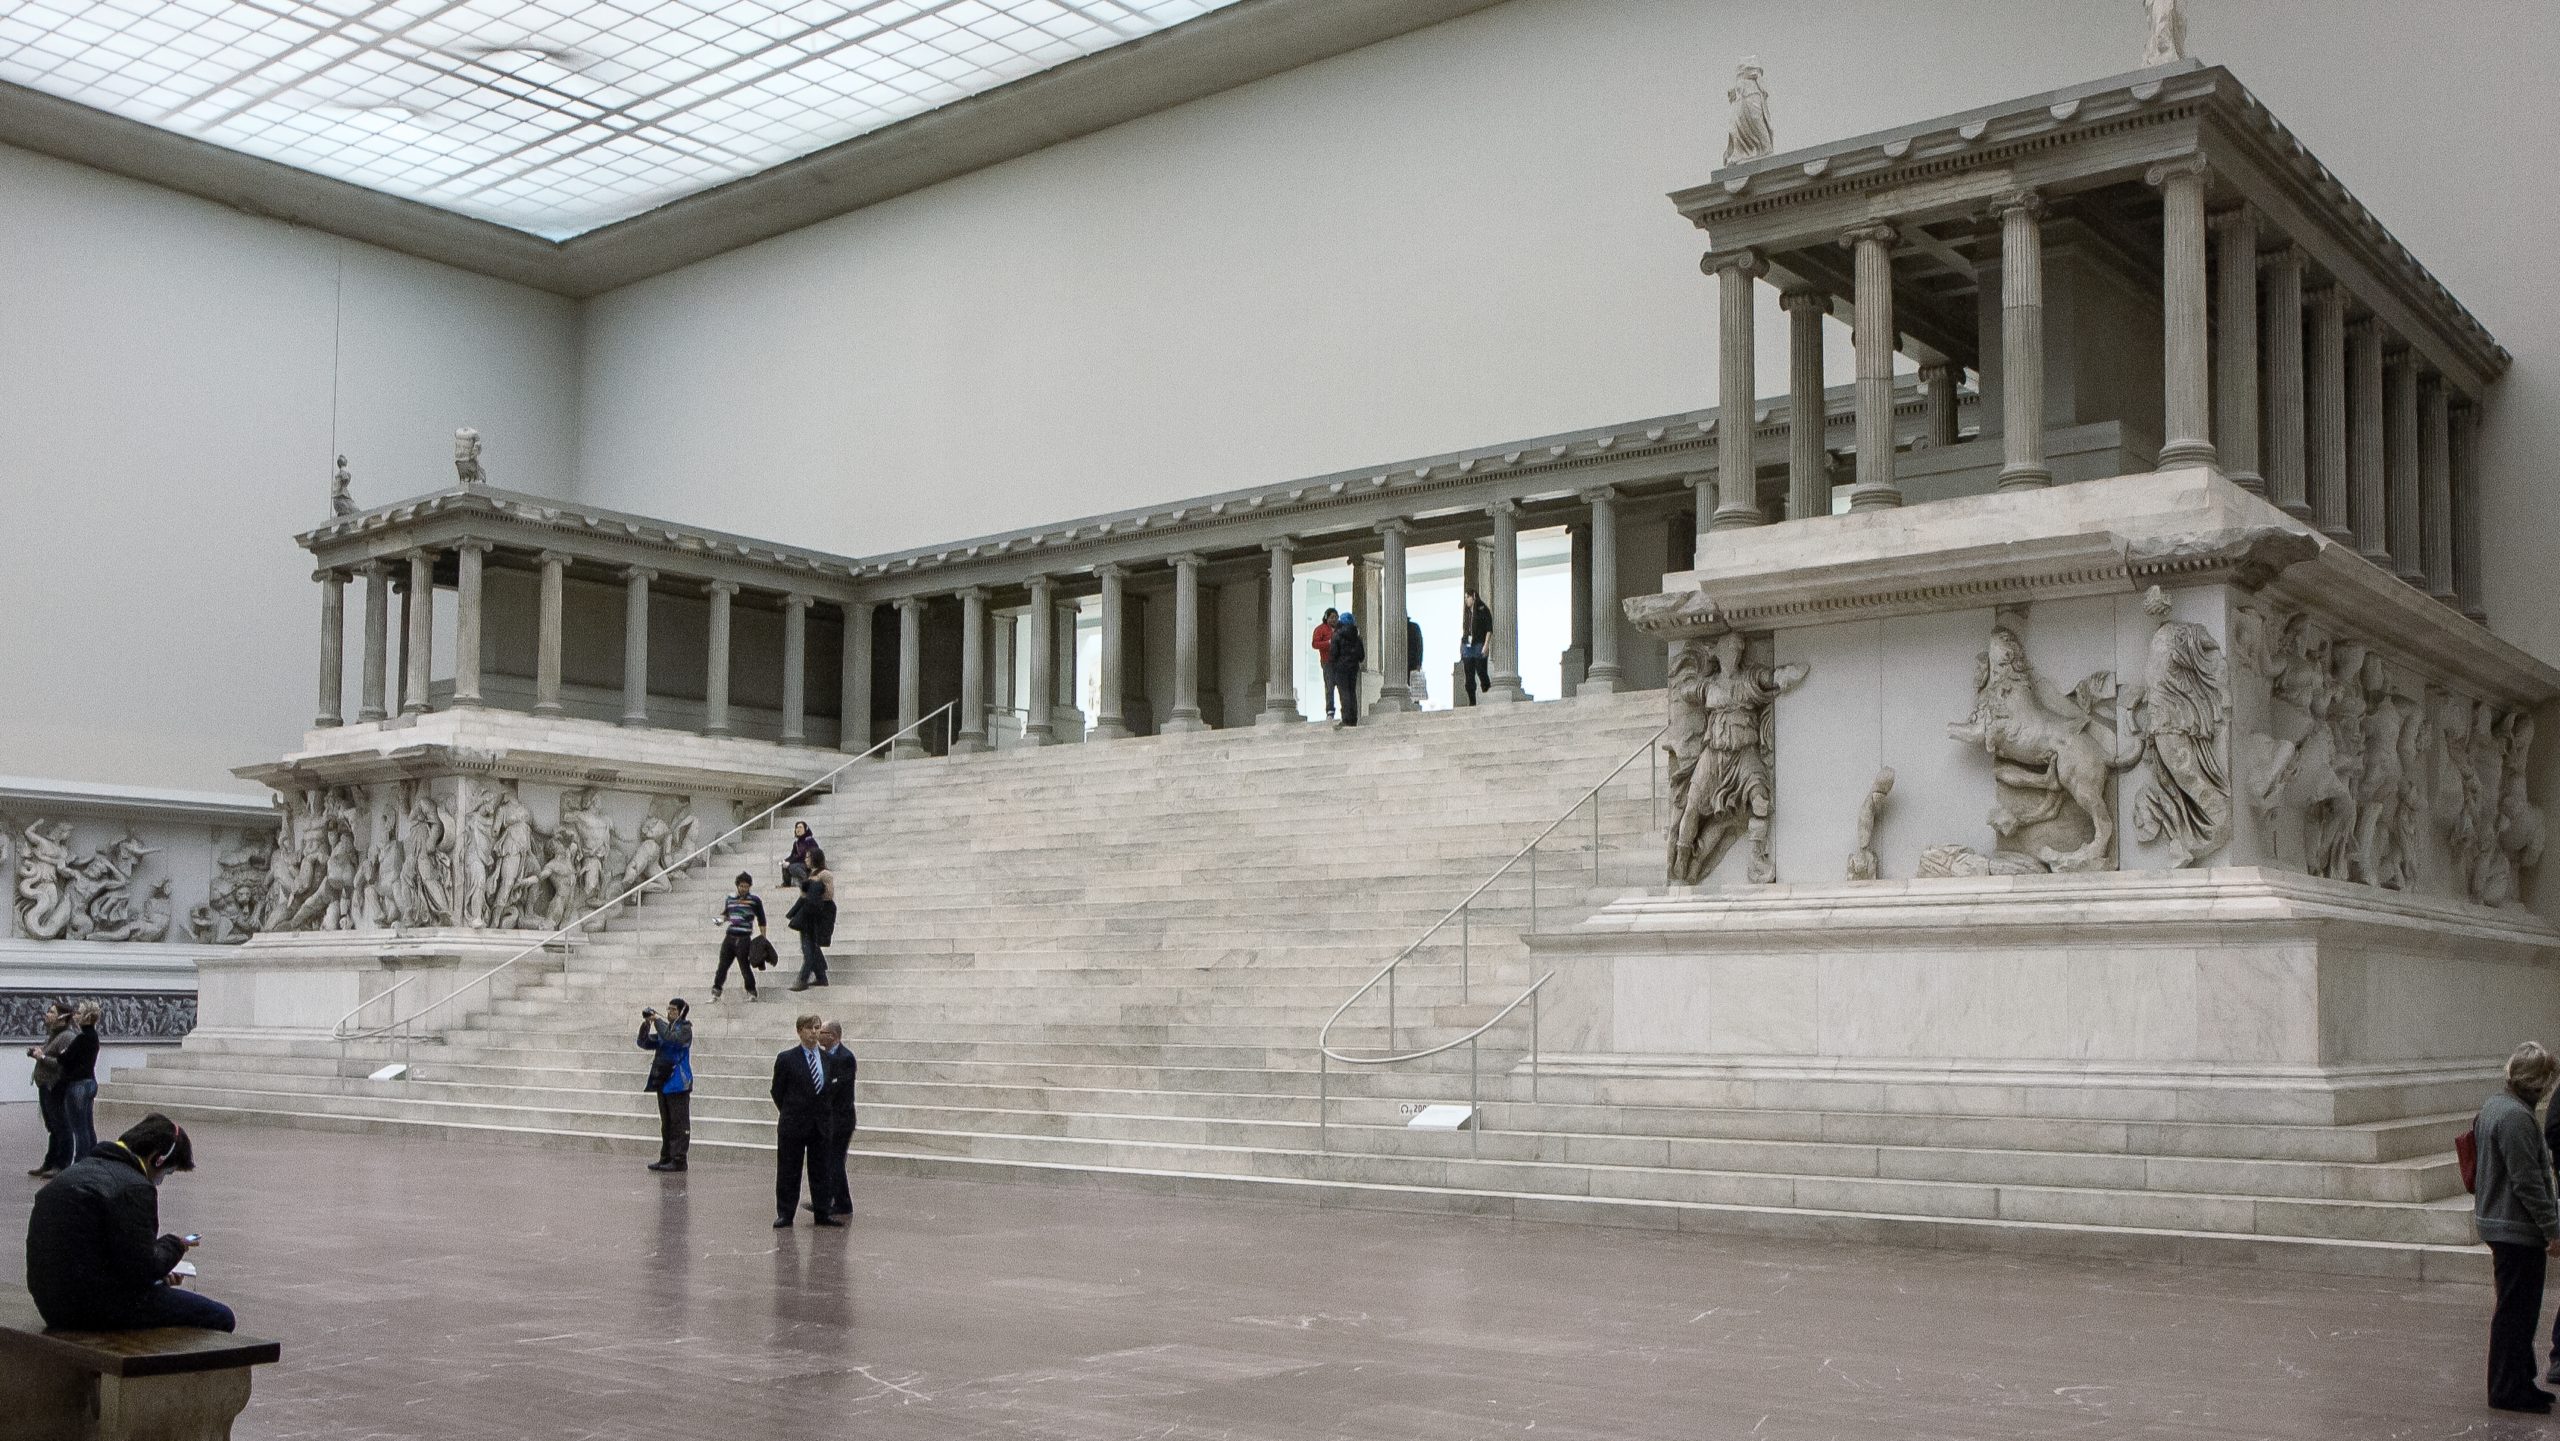 The western side of the Pergamon Altar as reconstructed in the Pergamon Museum in Berlin